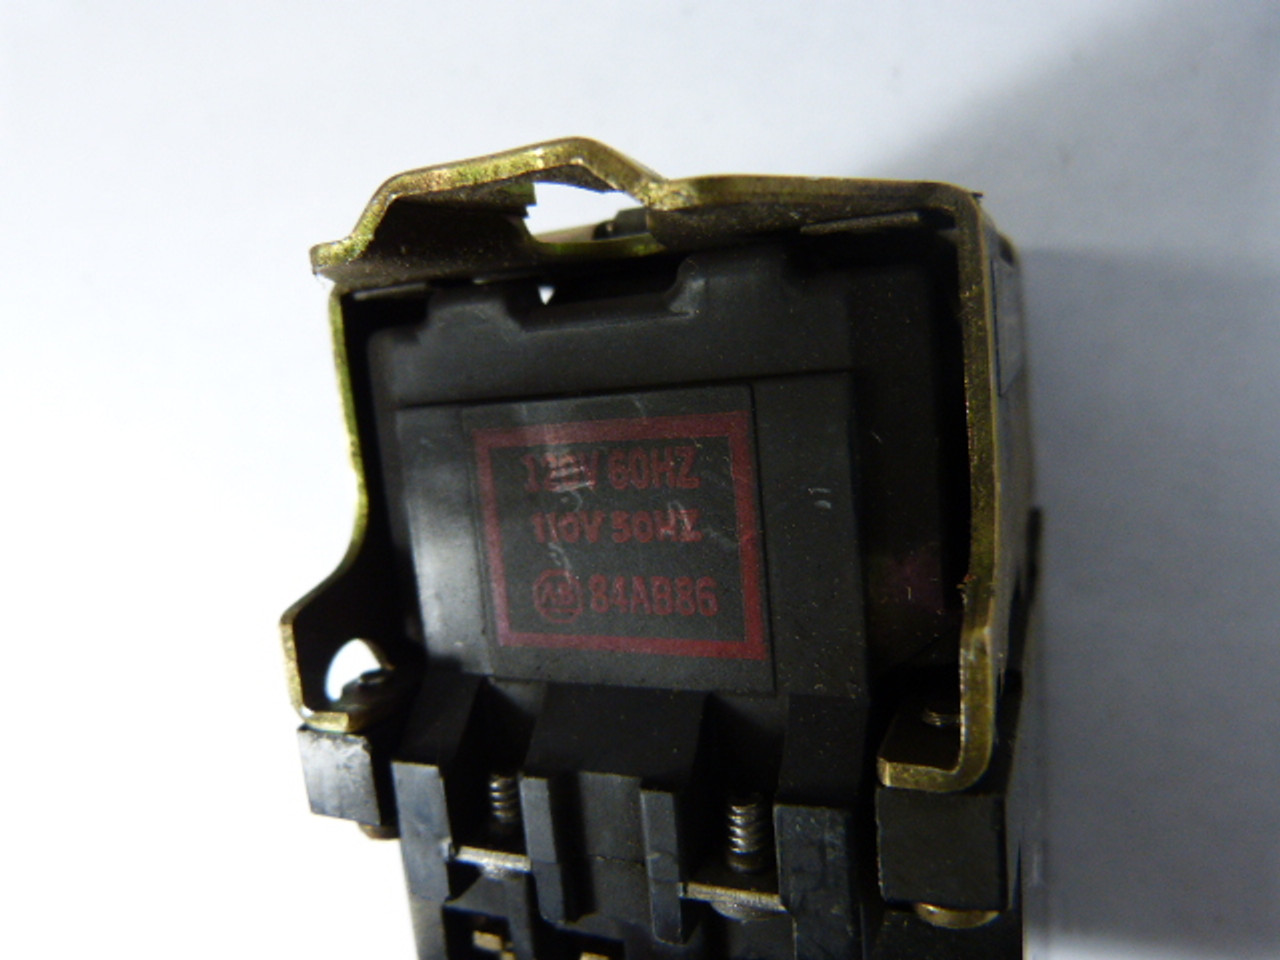 Allen-Bradley 700-NZ2240A1 Industrial Relay 10amp 120V Coil USED